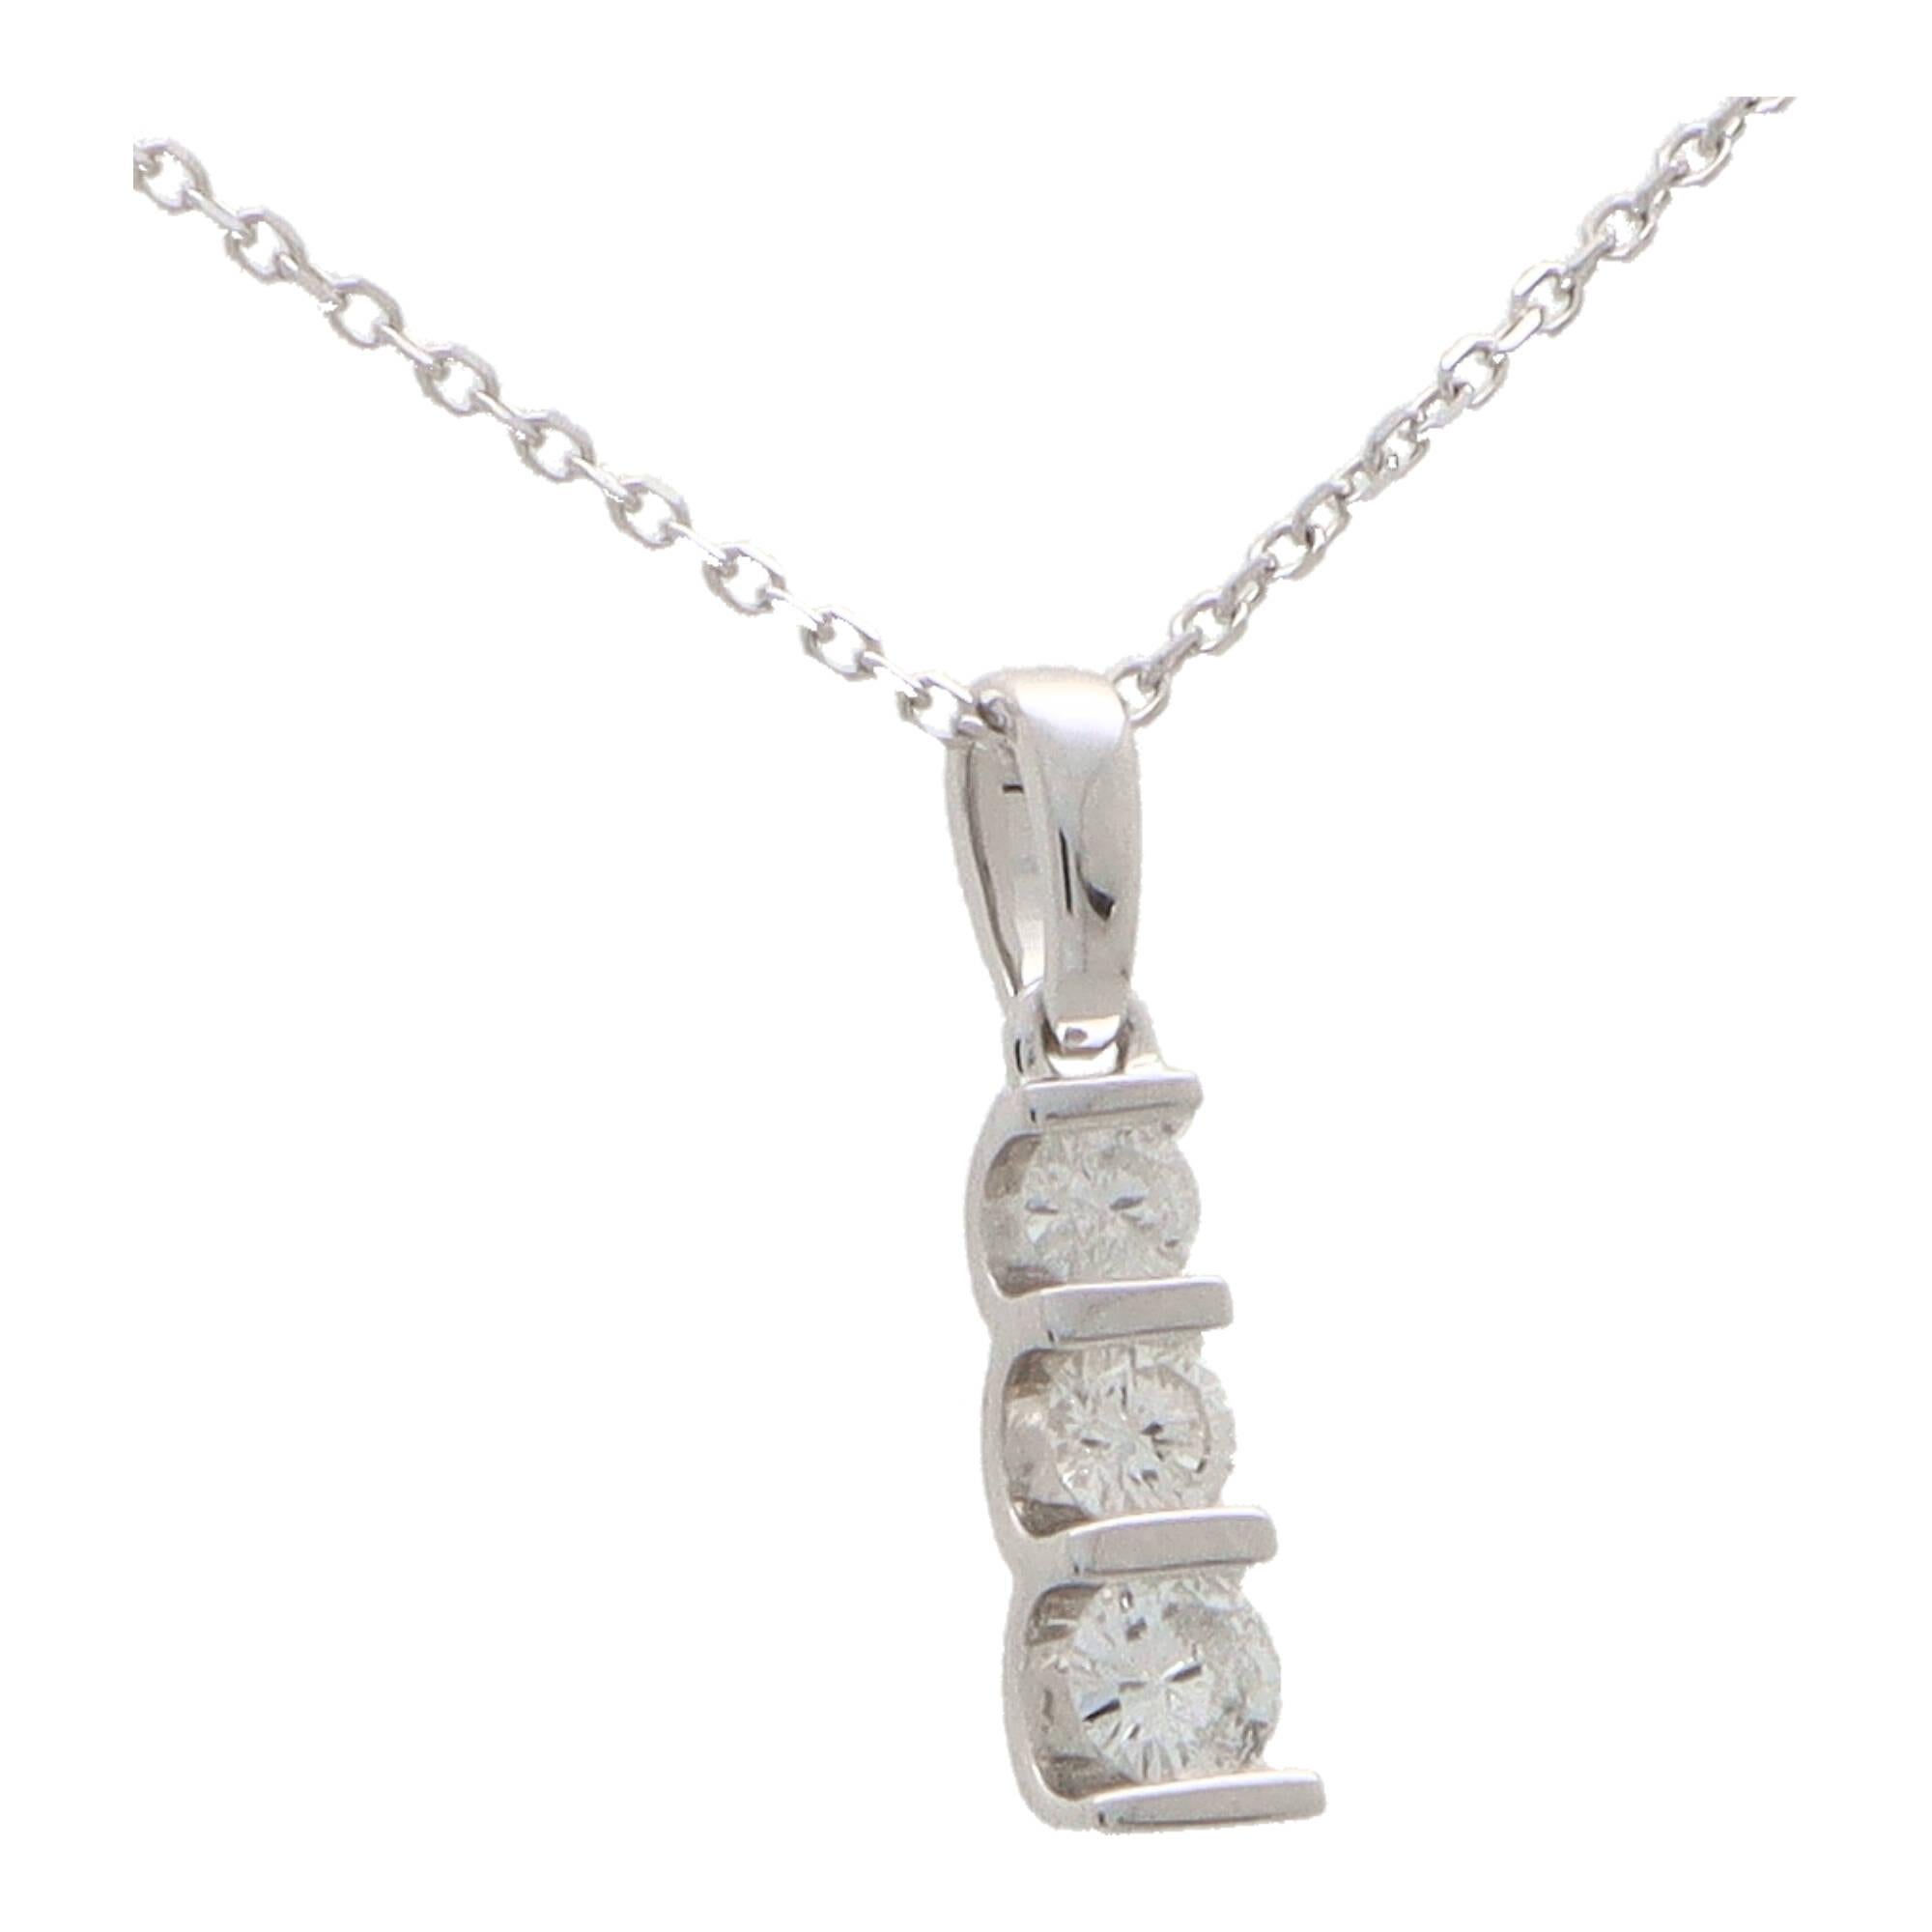 A stylish contemporary diamond pendant set in 14k white gold.

The pendant is set with three graduating diamonds that are all securely rub over set in a white gold setting. The pendant hangs from a 16-inch fine white gold trace chain.

Due to the